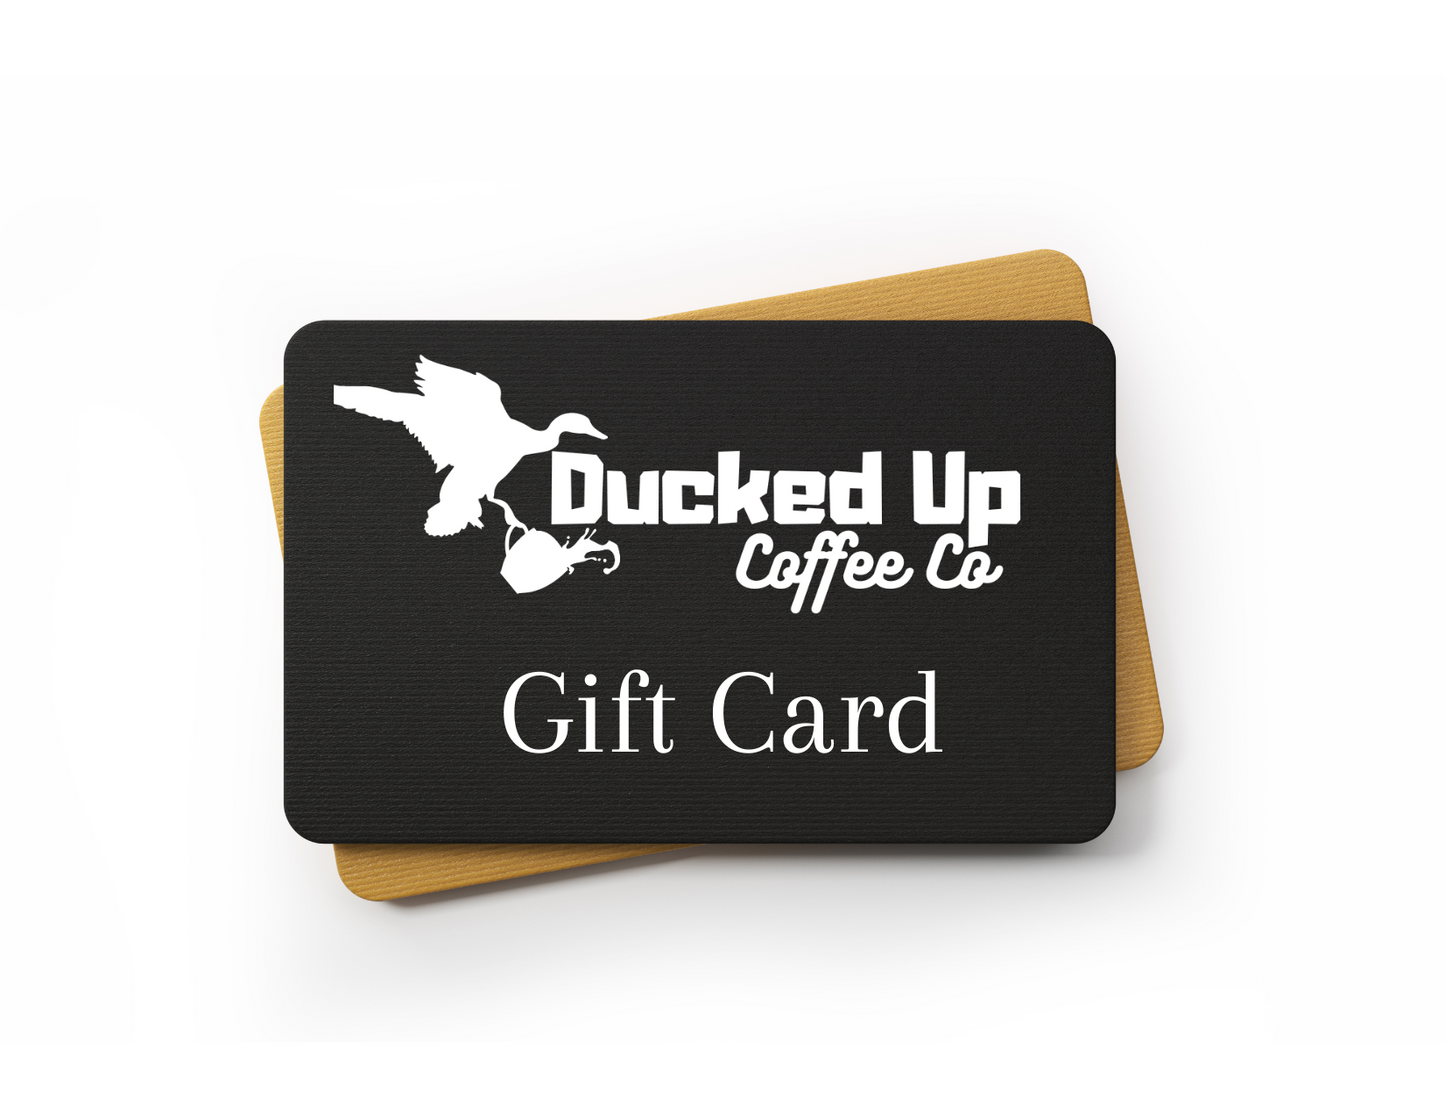 Ducked Up Coffee Gift Card